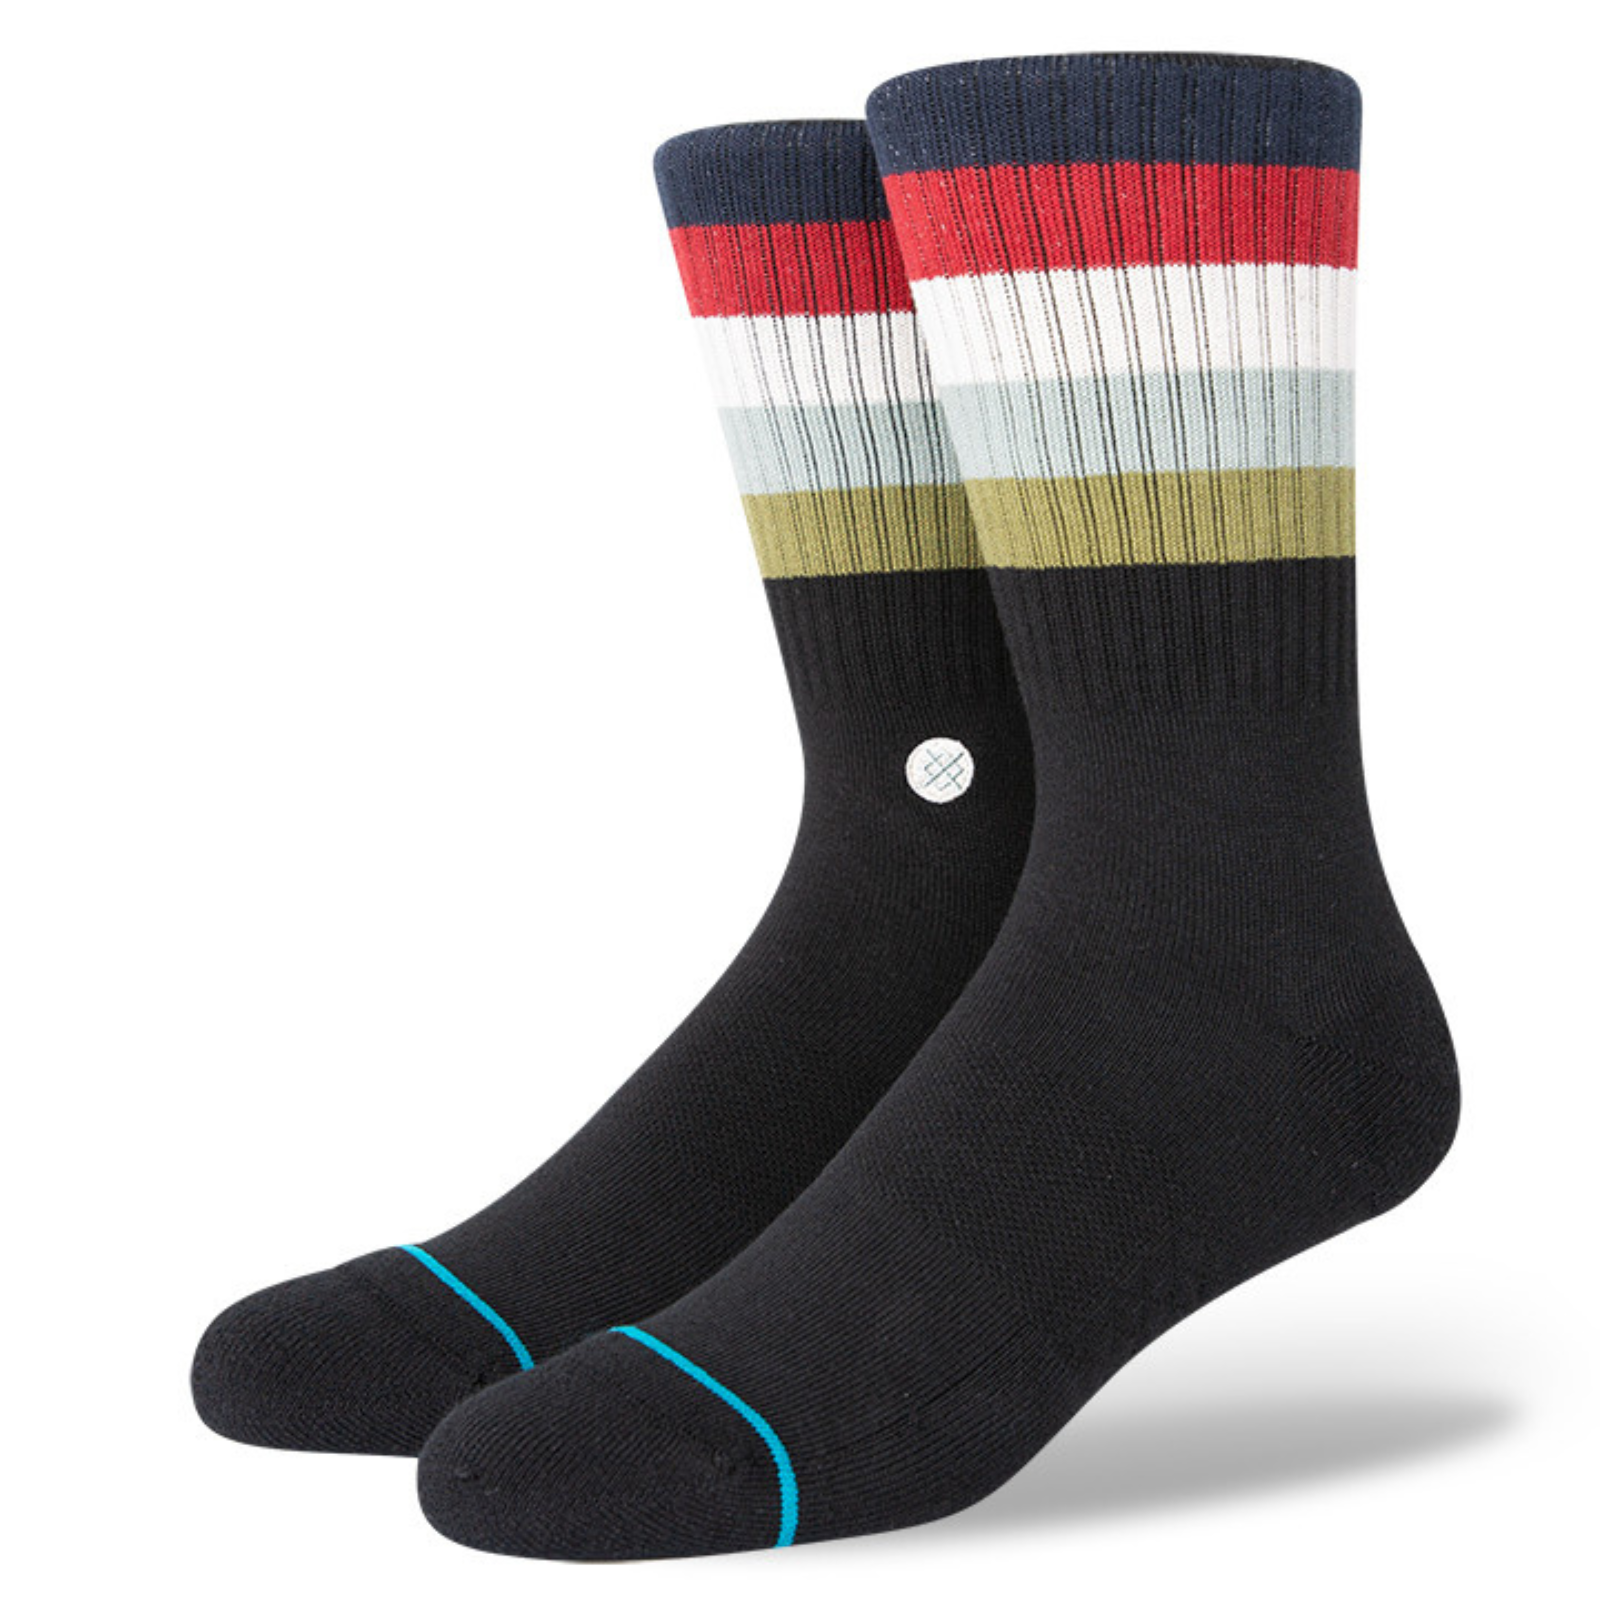 Stance Maliboo men's crew sock featuring black sock with navy, red, white, gray, and olive stripes at cuff. Socks shown on display feet. 